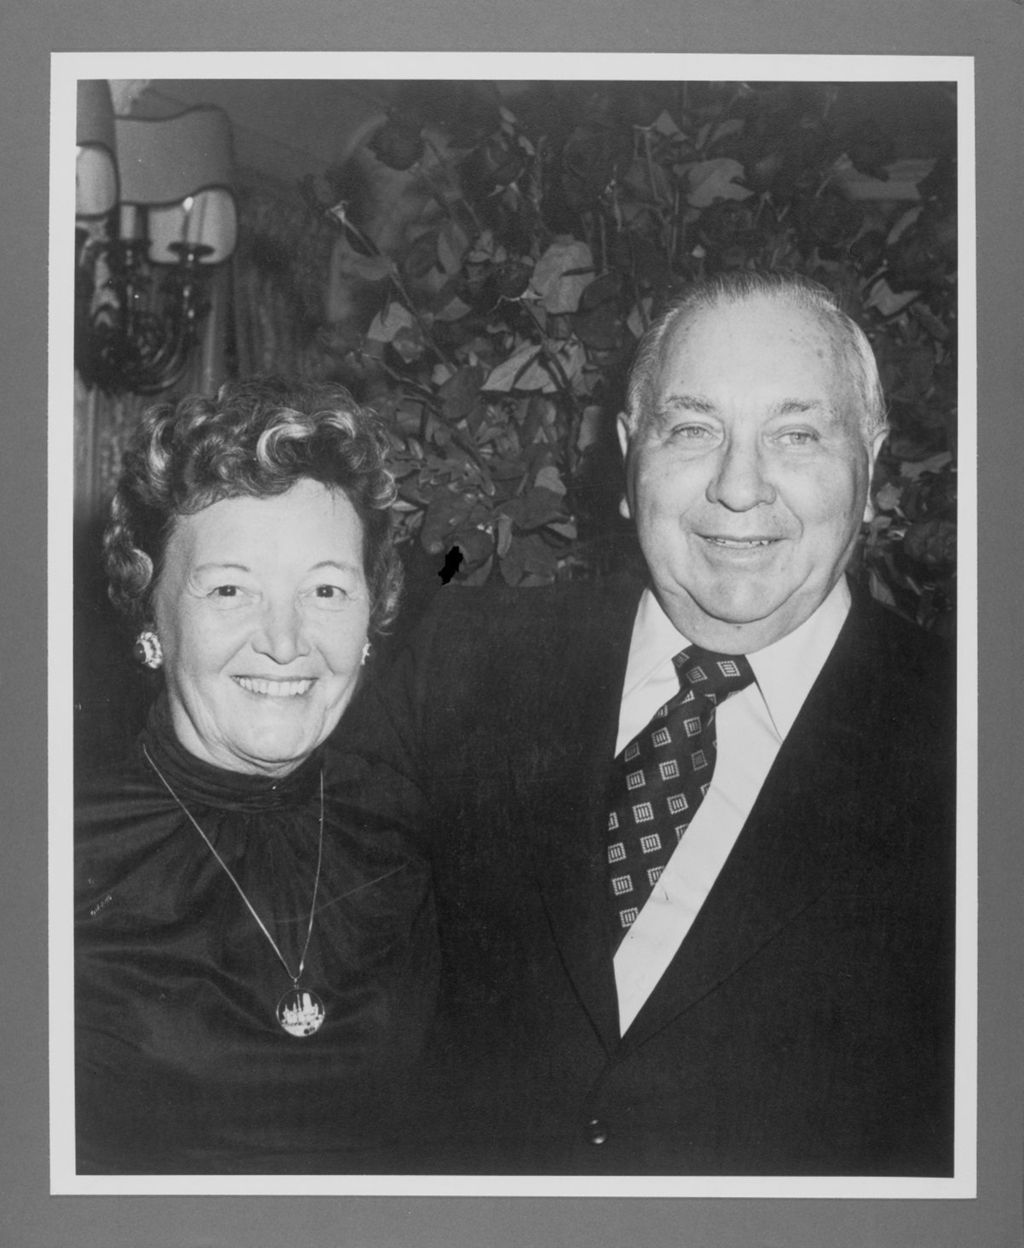 Miniature of Eleanor and Richard J. Daley at a reception